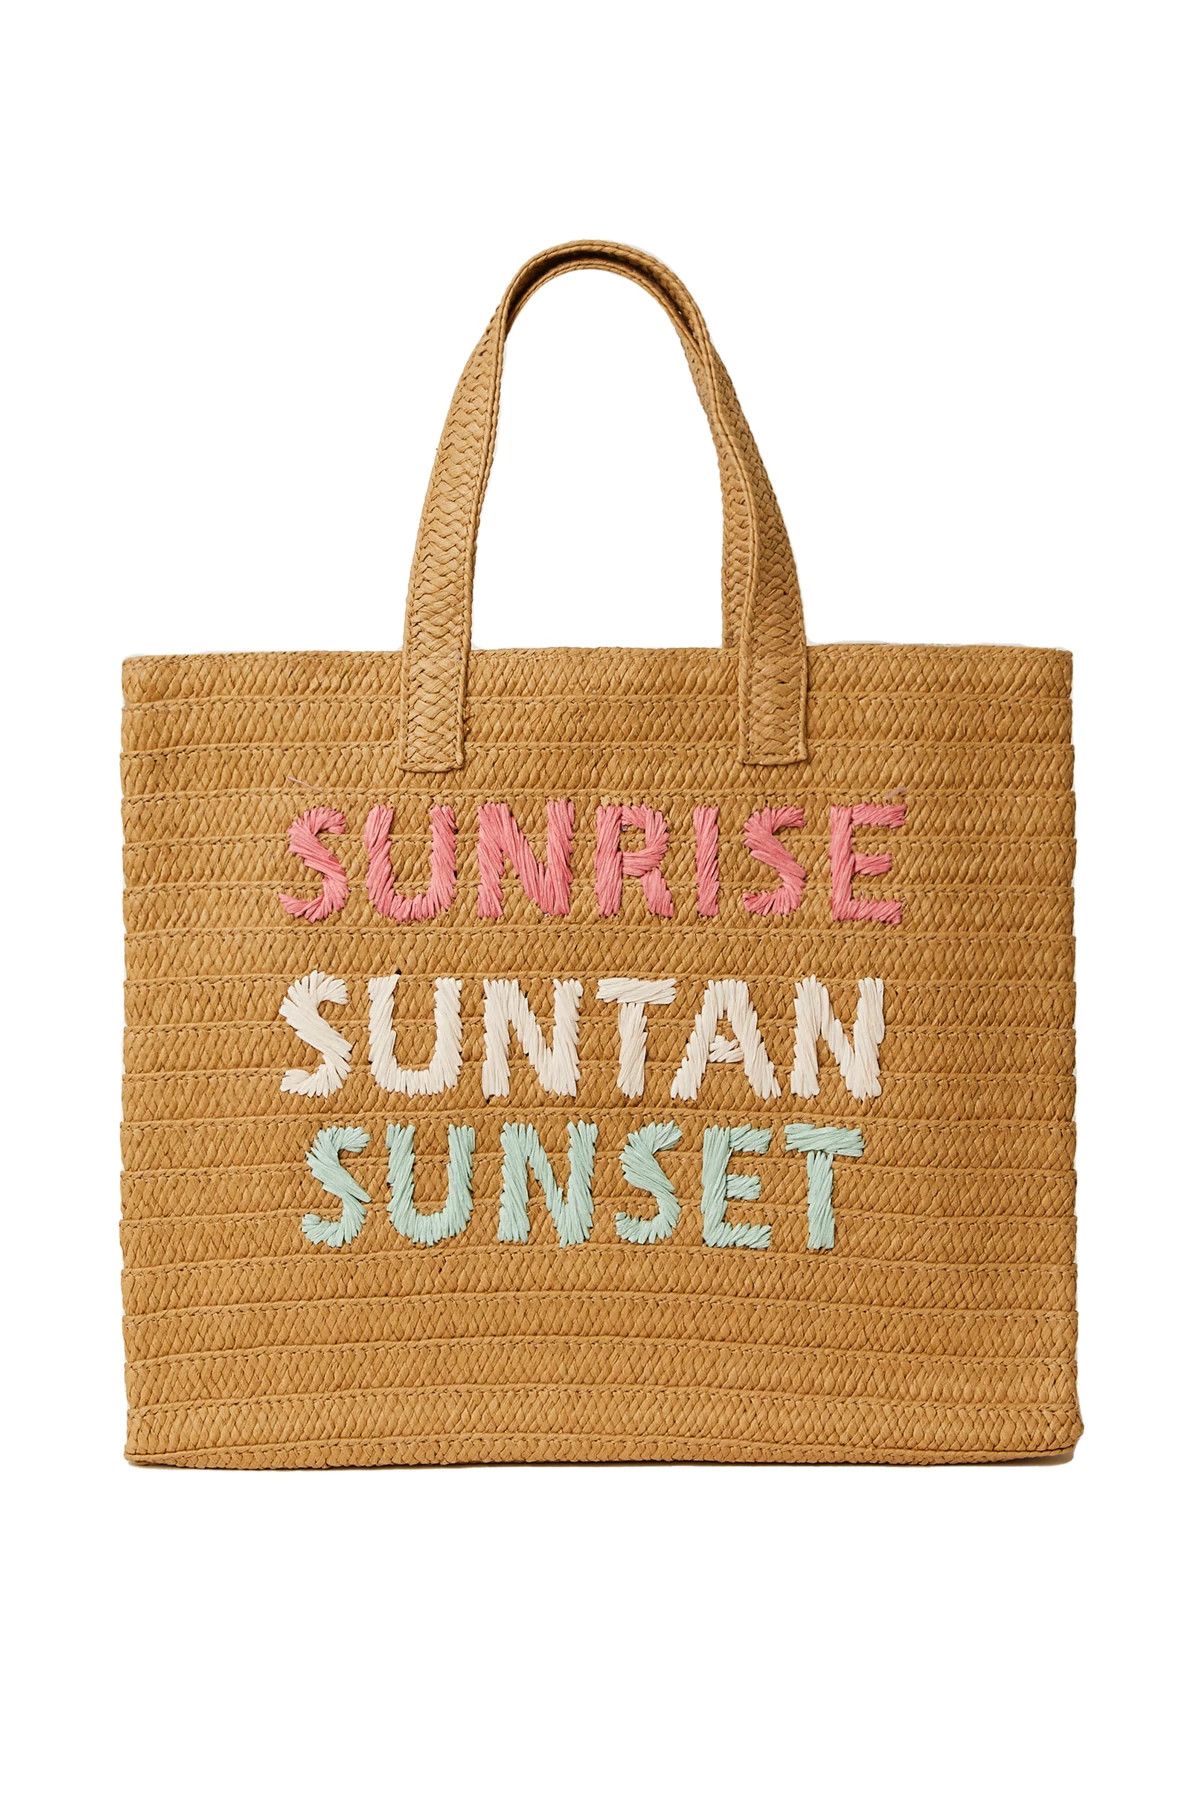 Sunrise Sunset Tote | Everything But Water